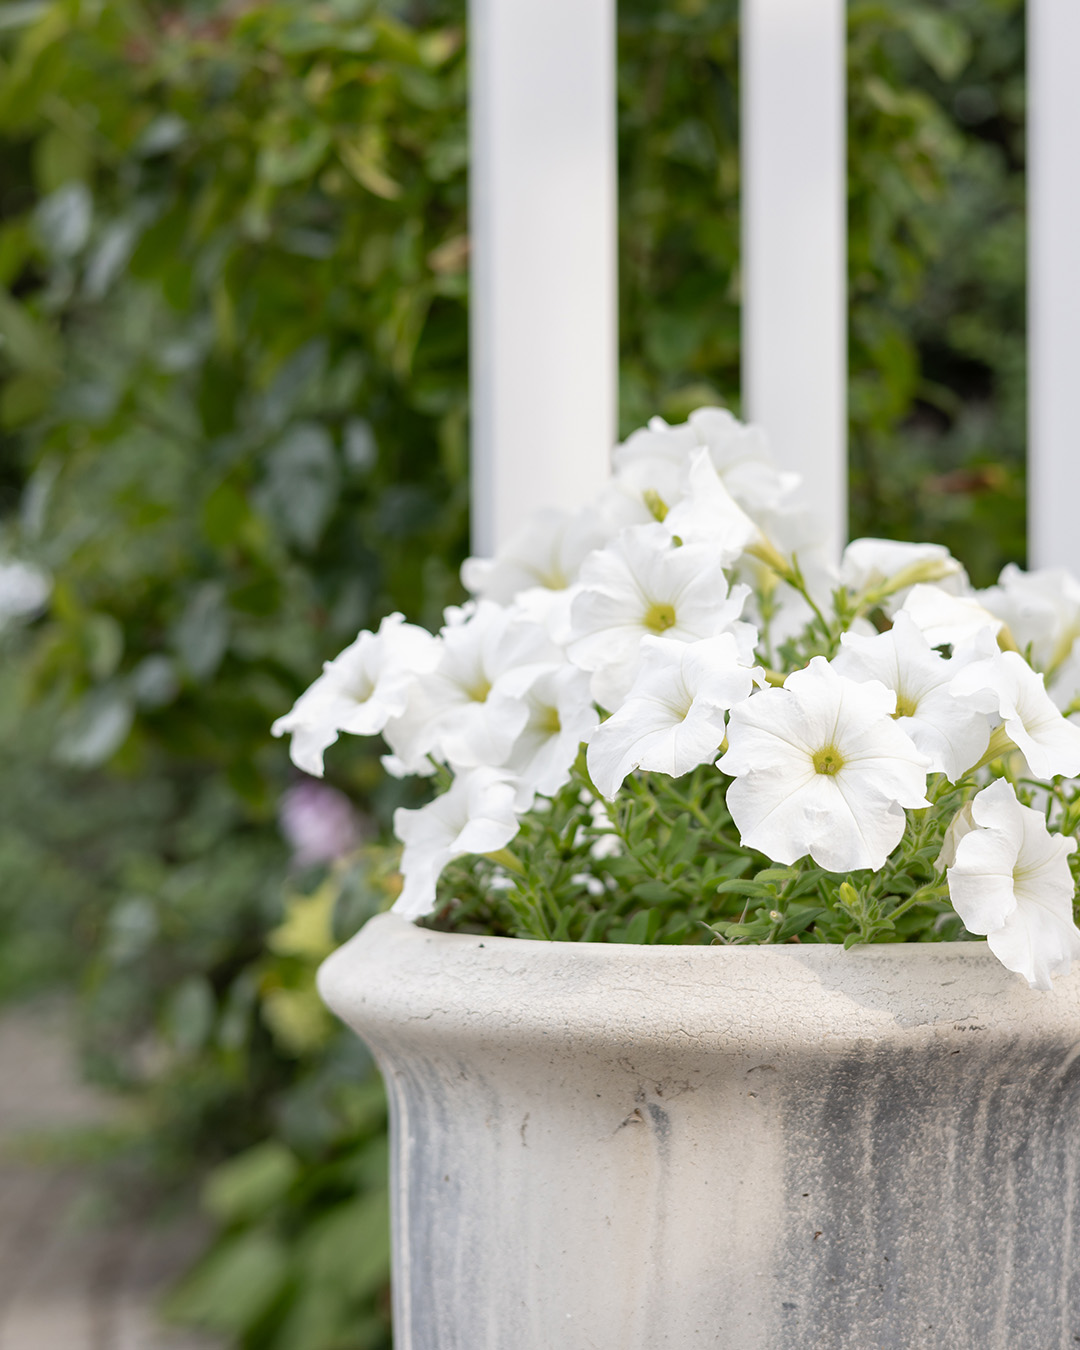 Well-maintained and healthy petunias